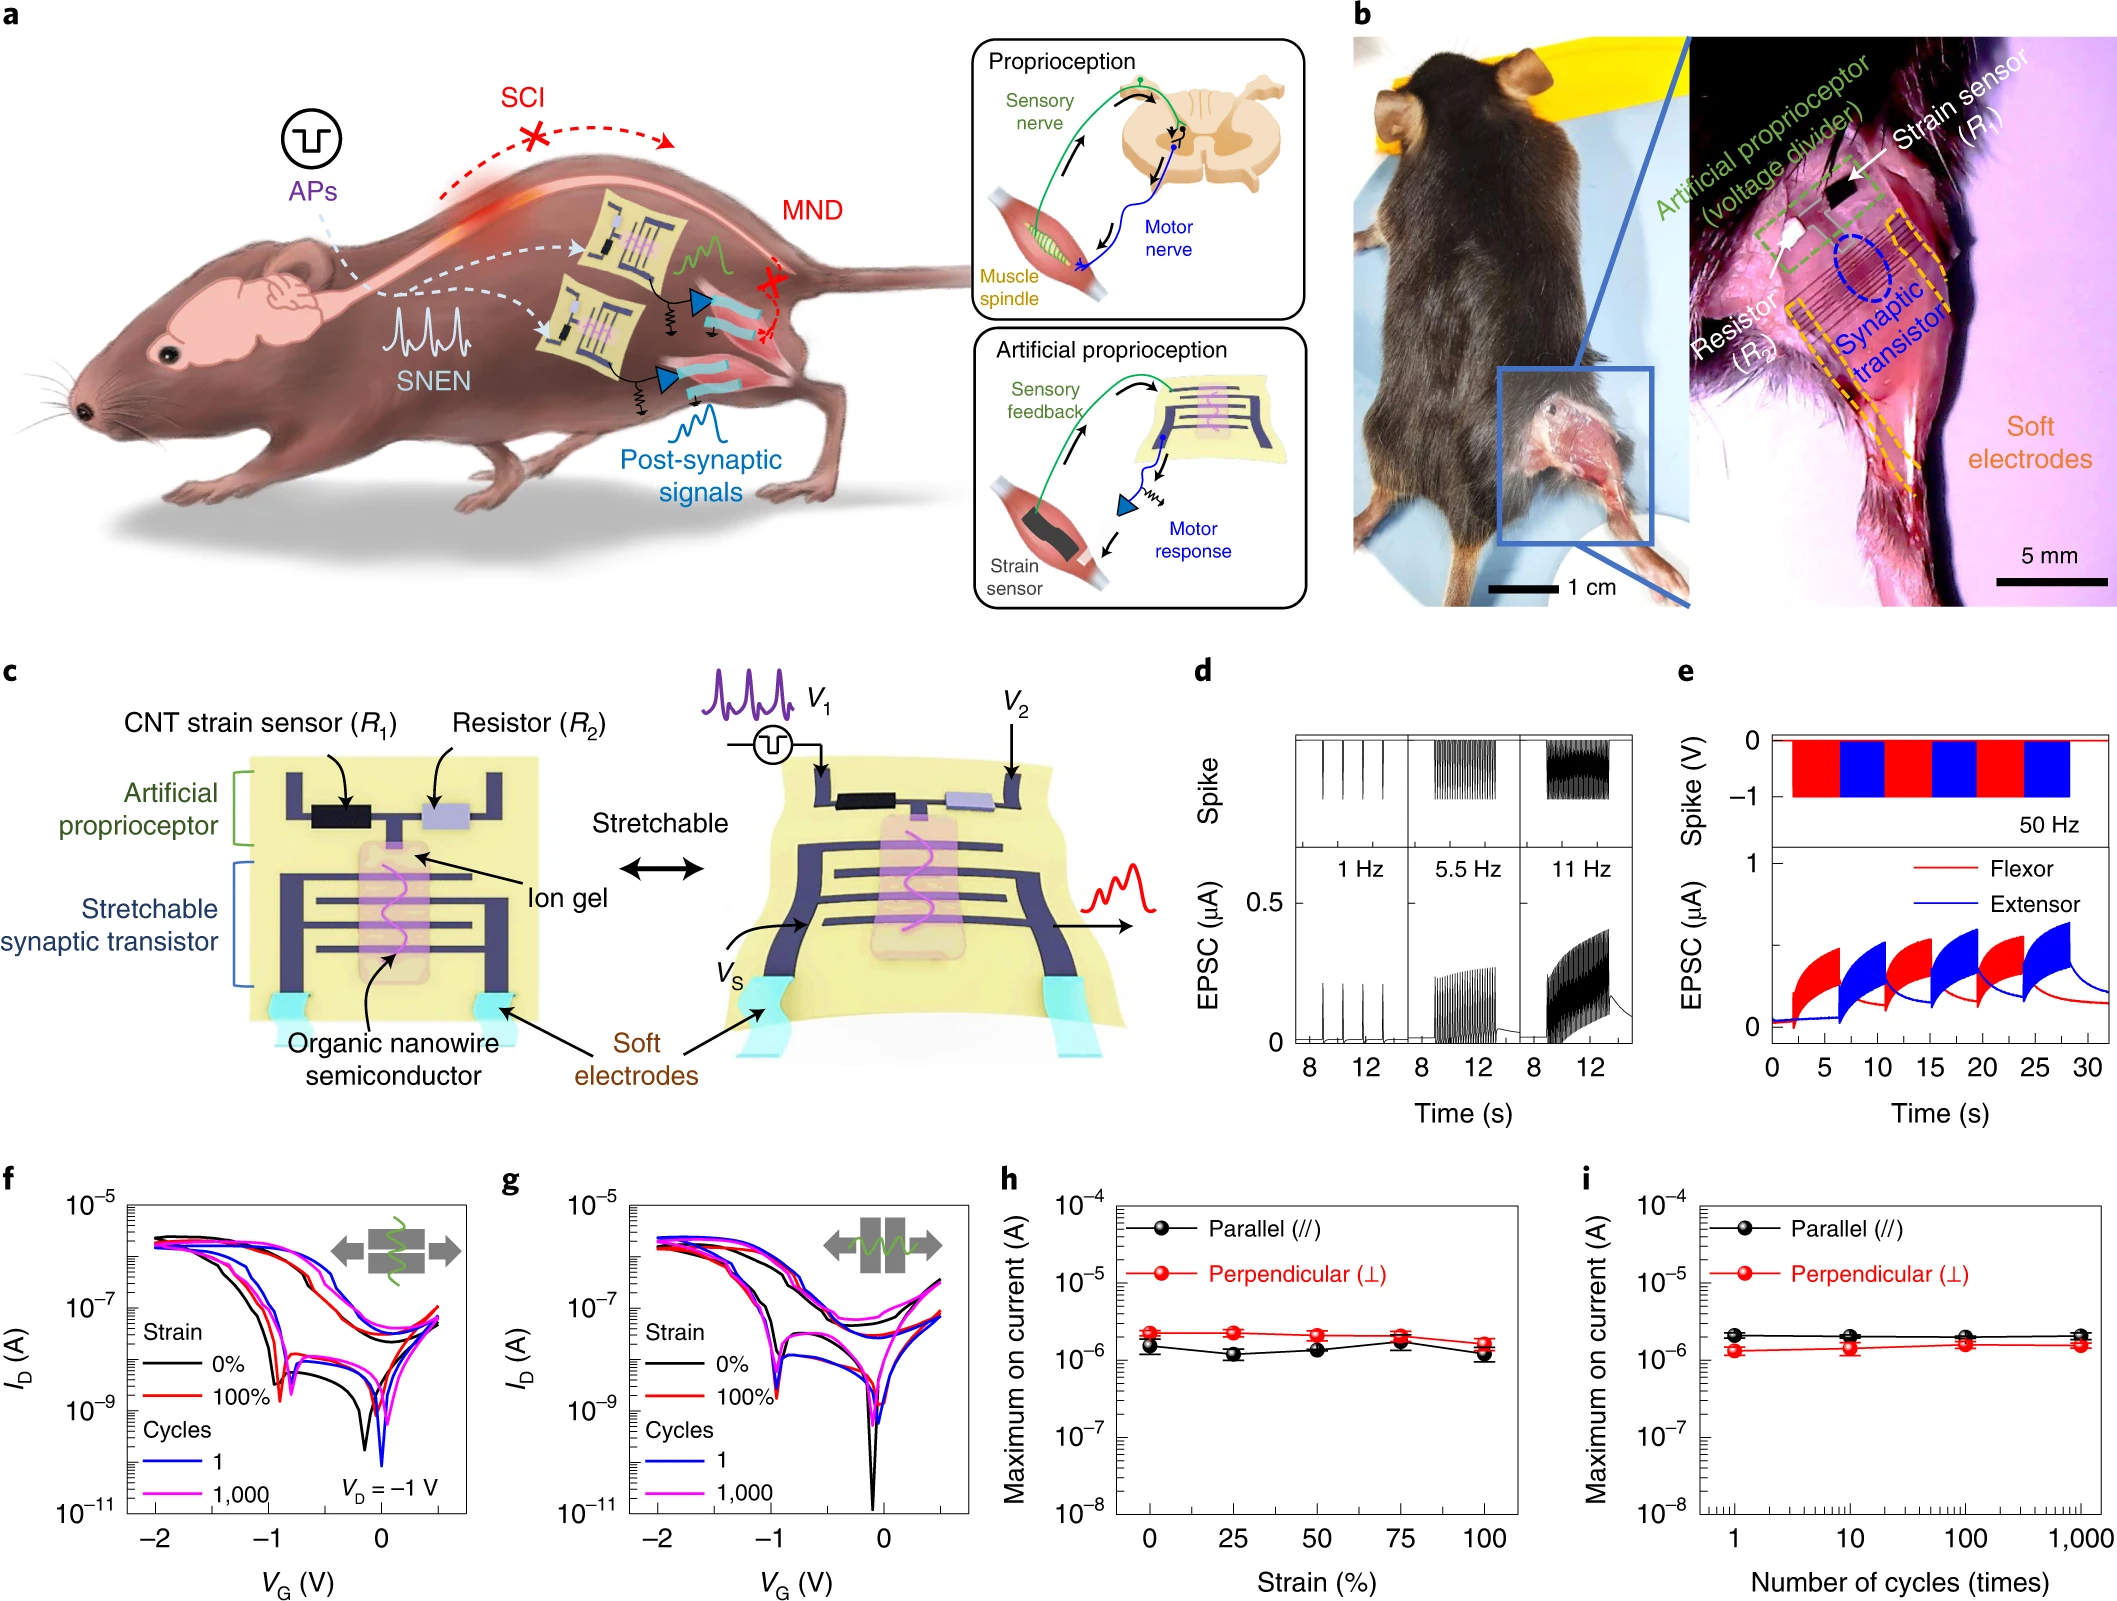 A low-power stretchable neuromorphic nerve with proprioceptive feedback